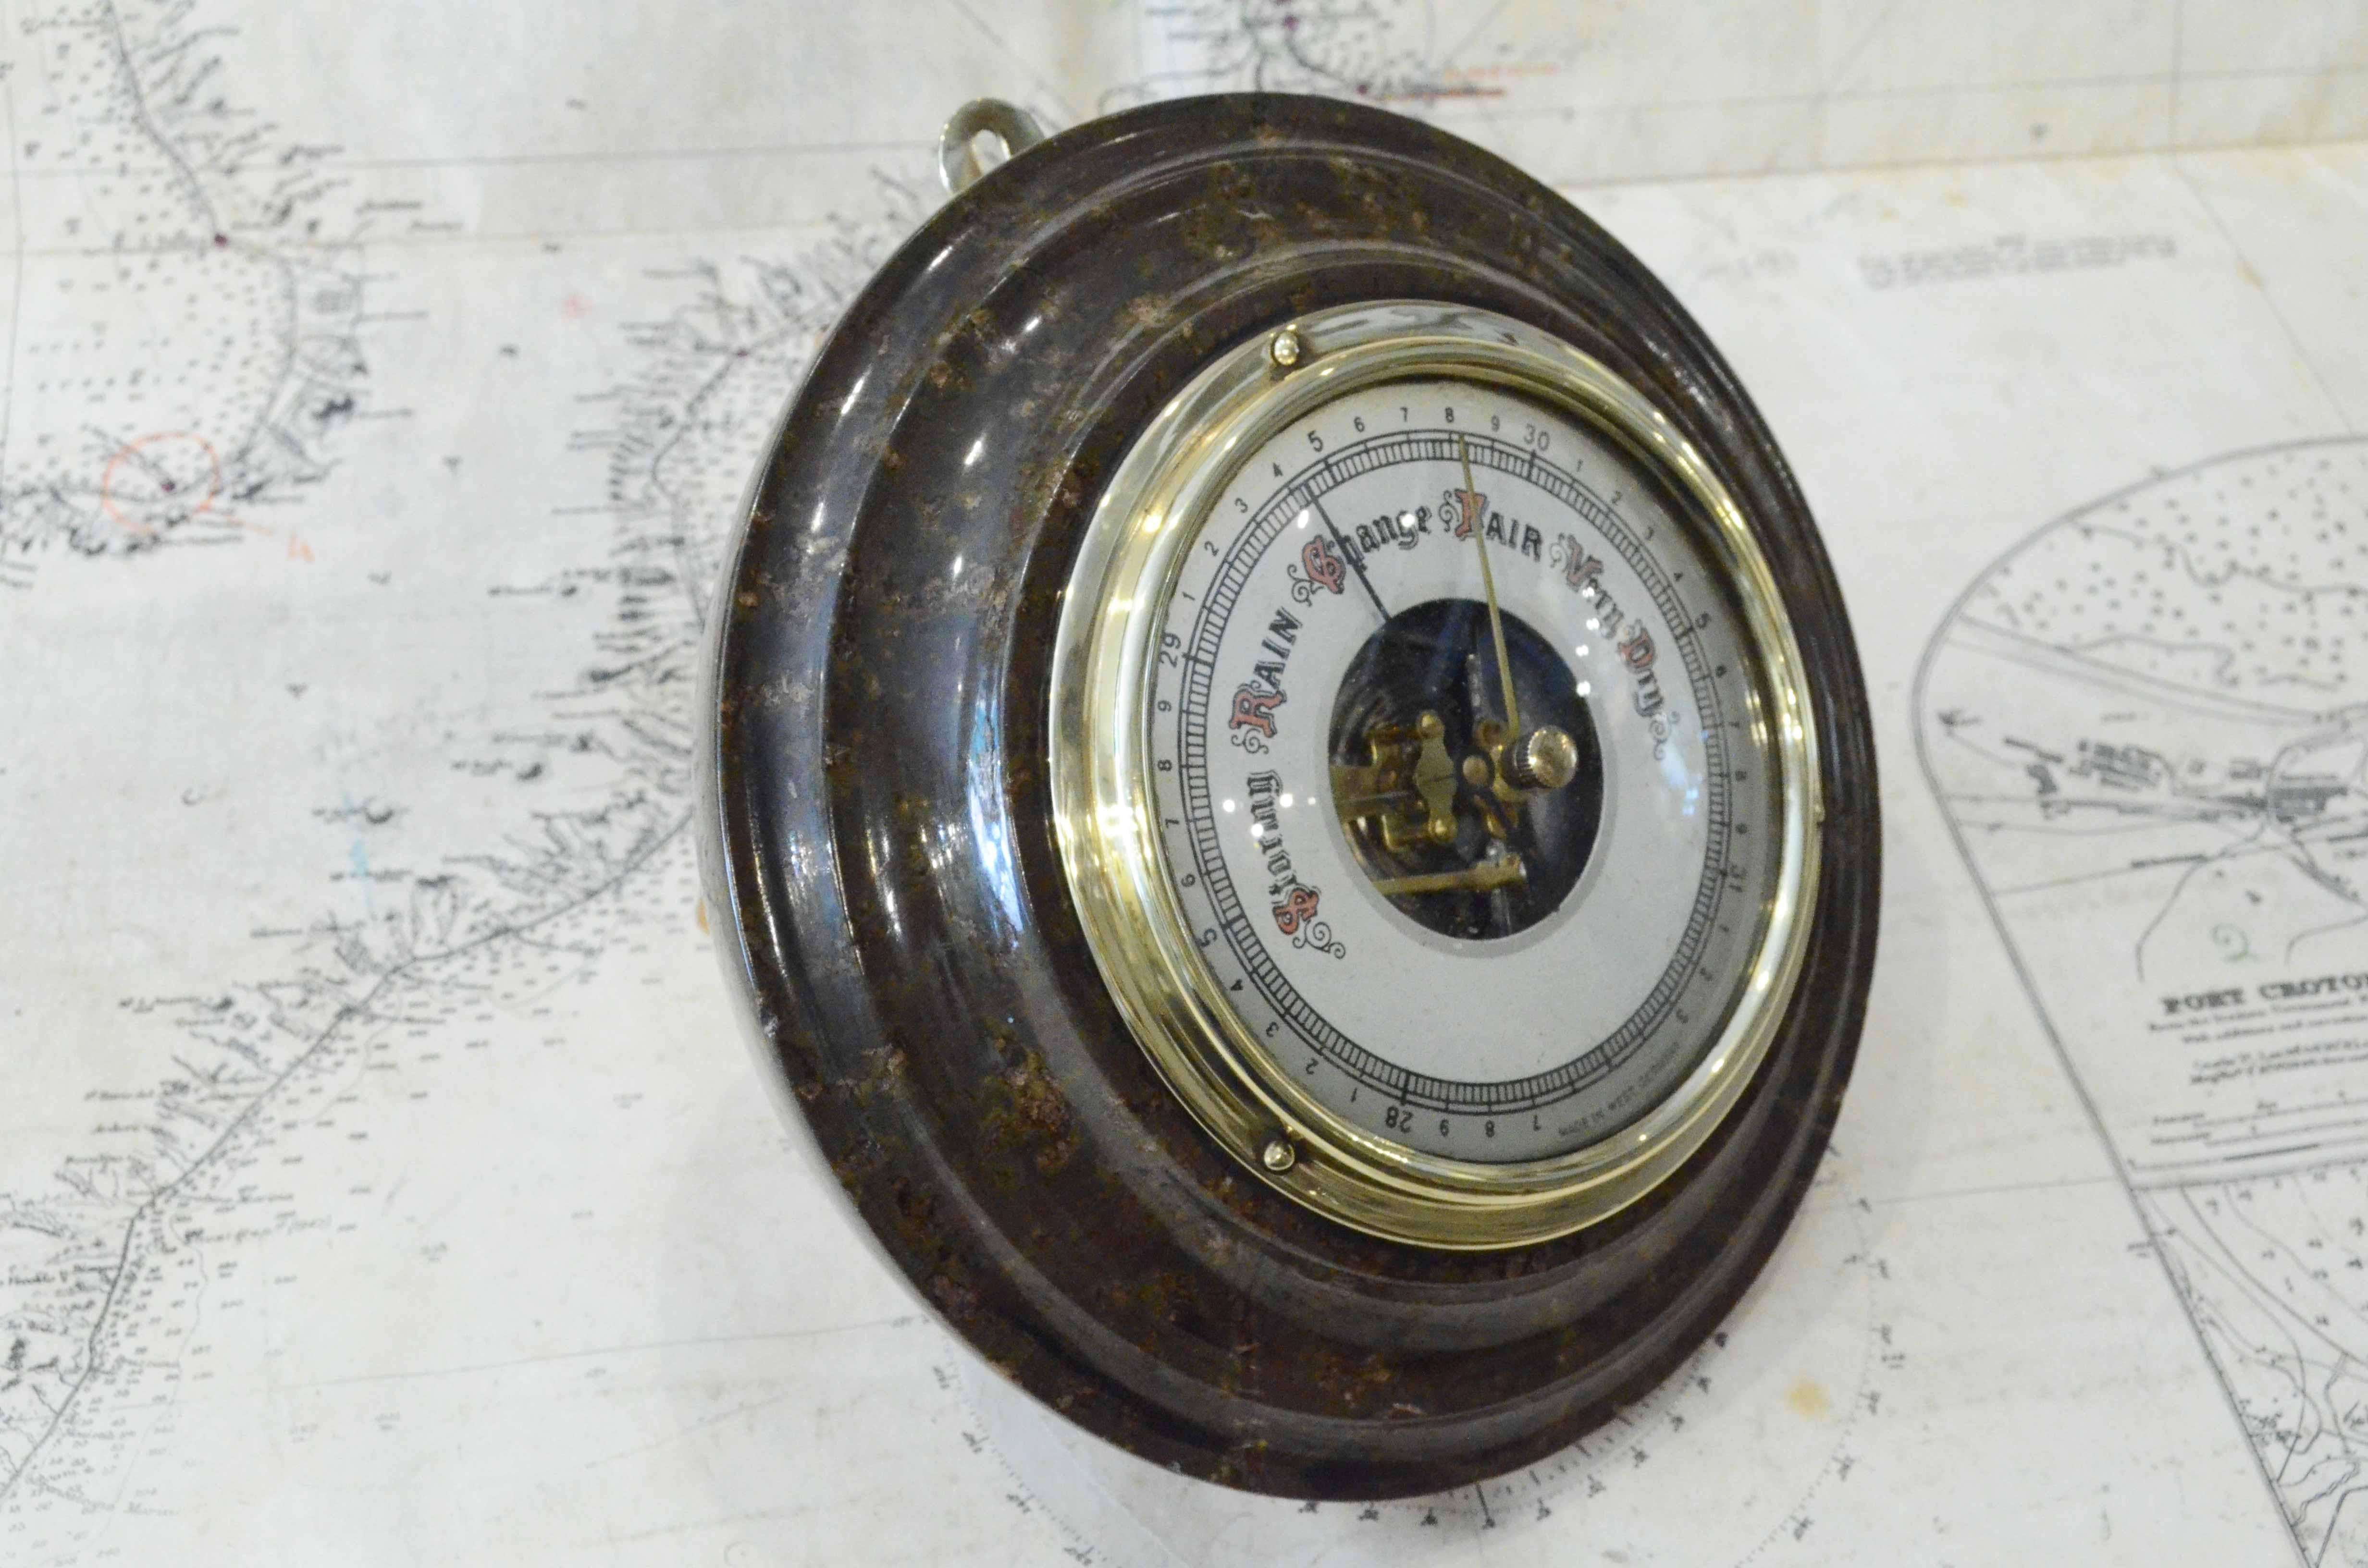 Antique German aneroid barometer from the early 1900s made of turned marble, brass, and glass.  
Good  state. Working order. 
Diameter cm 17 - inches 6.7, thickness cm  5- inches 1.9.
This is an ancient measuring instrument whose pressure-sensitive